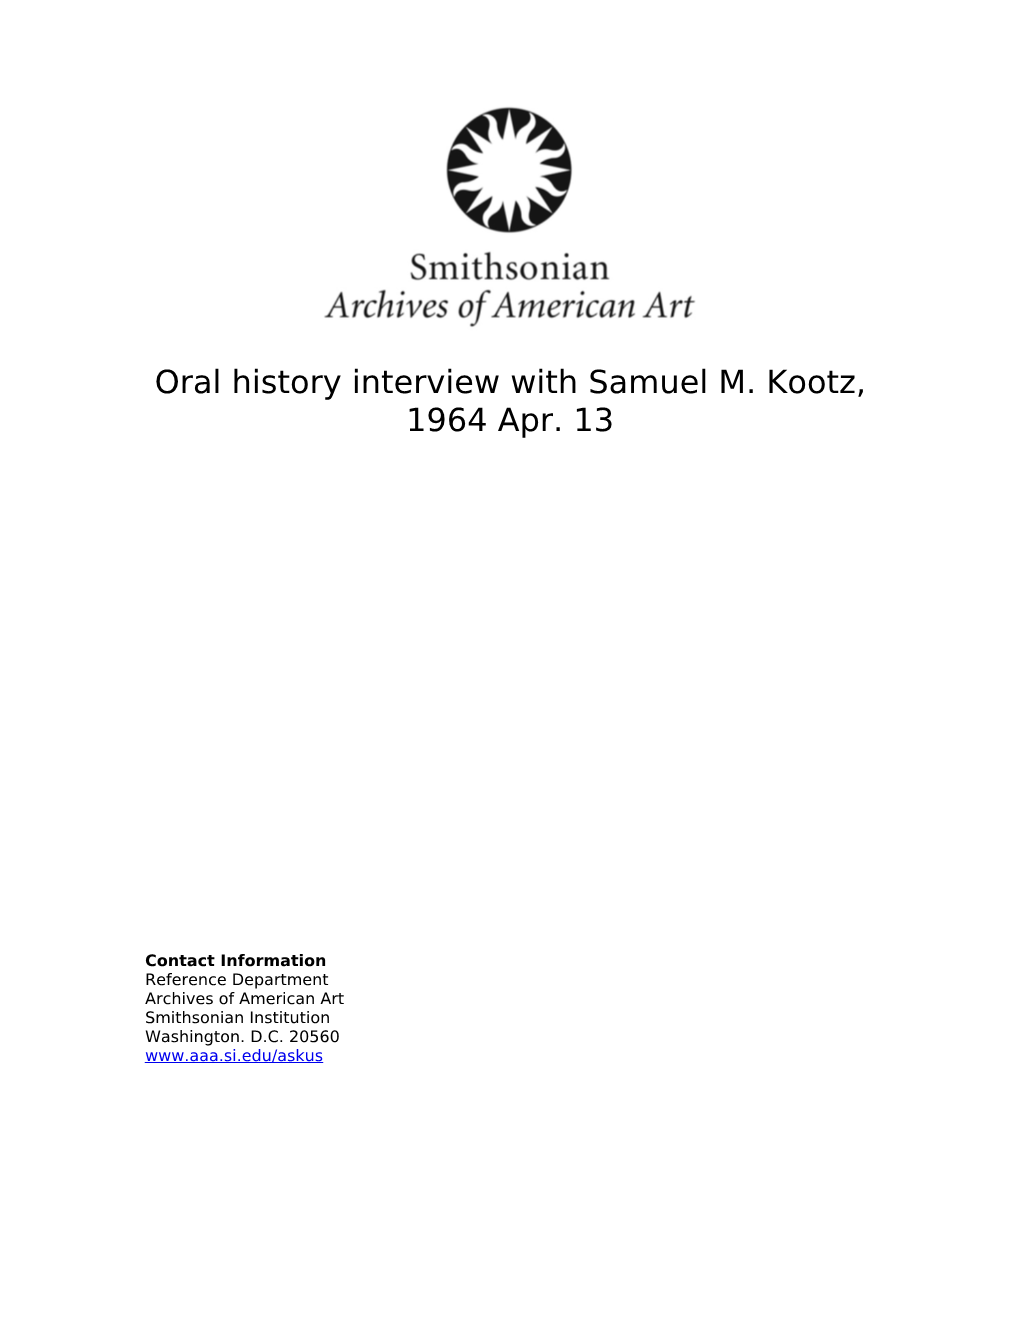 Oral History Interview with Samuel M. Kootz, 1964 Apr. 13